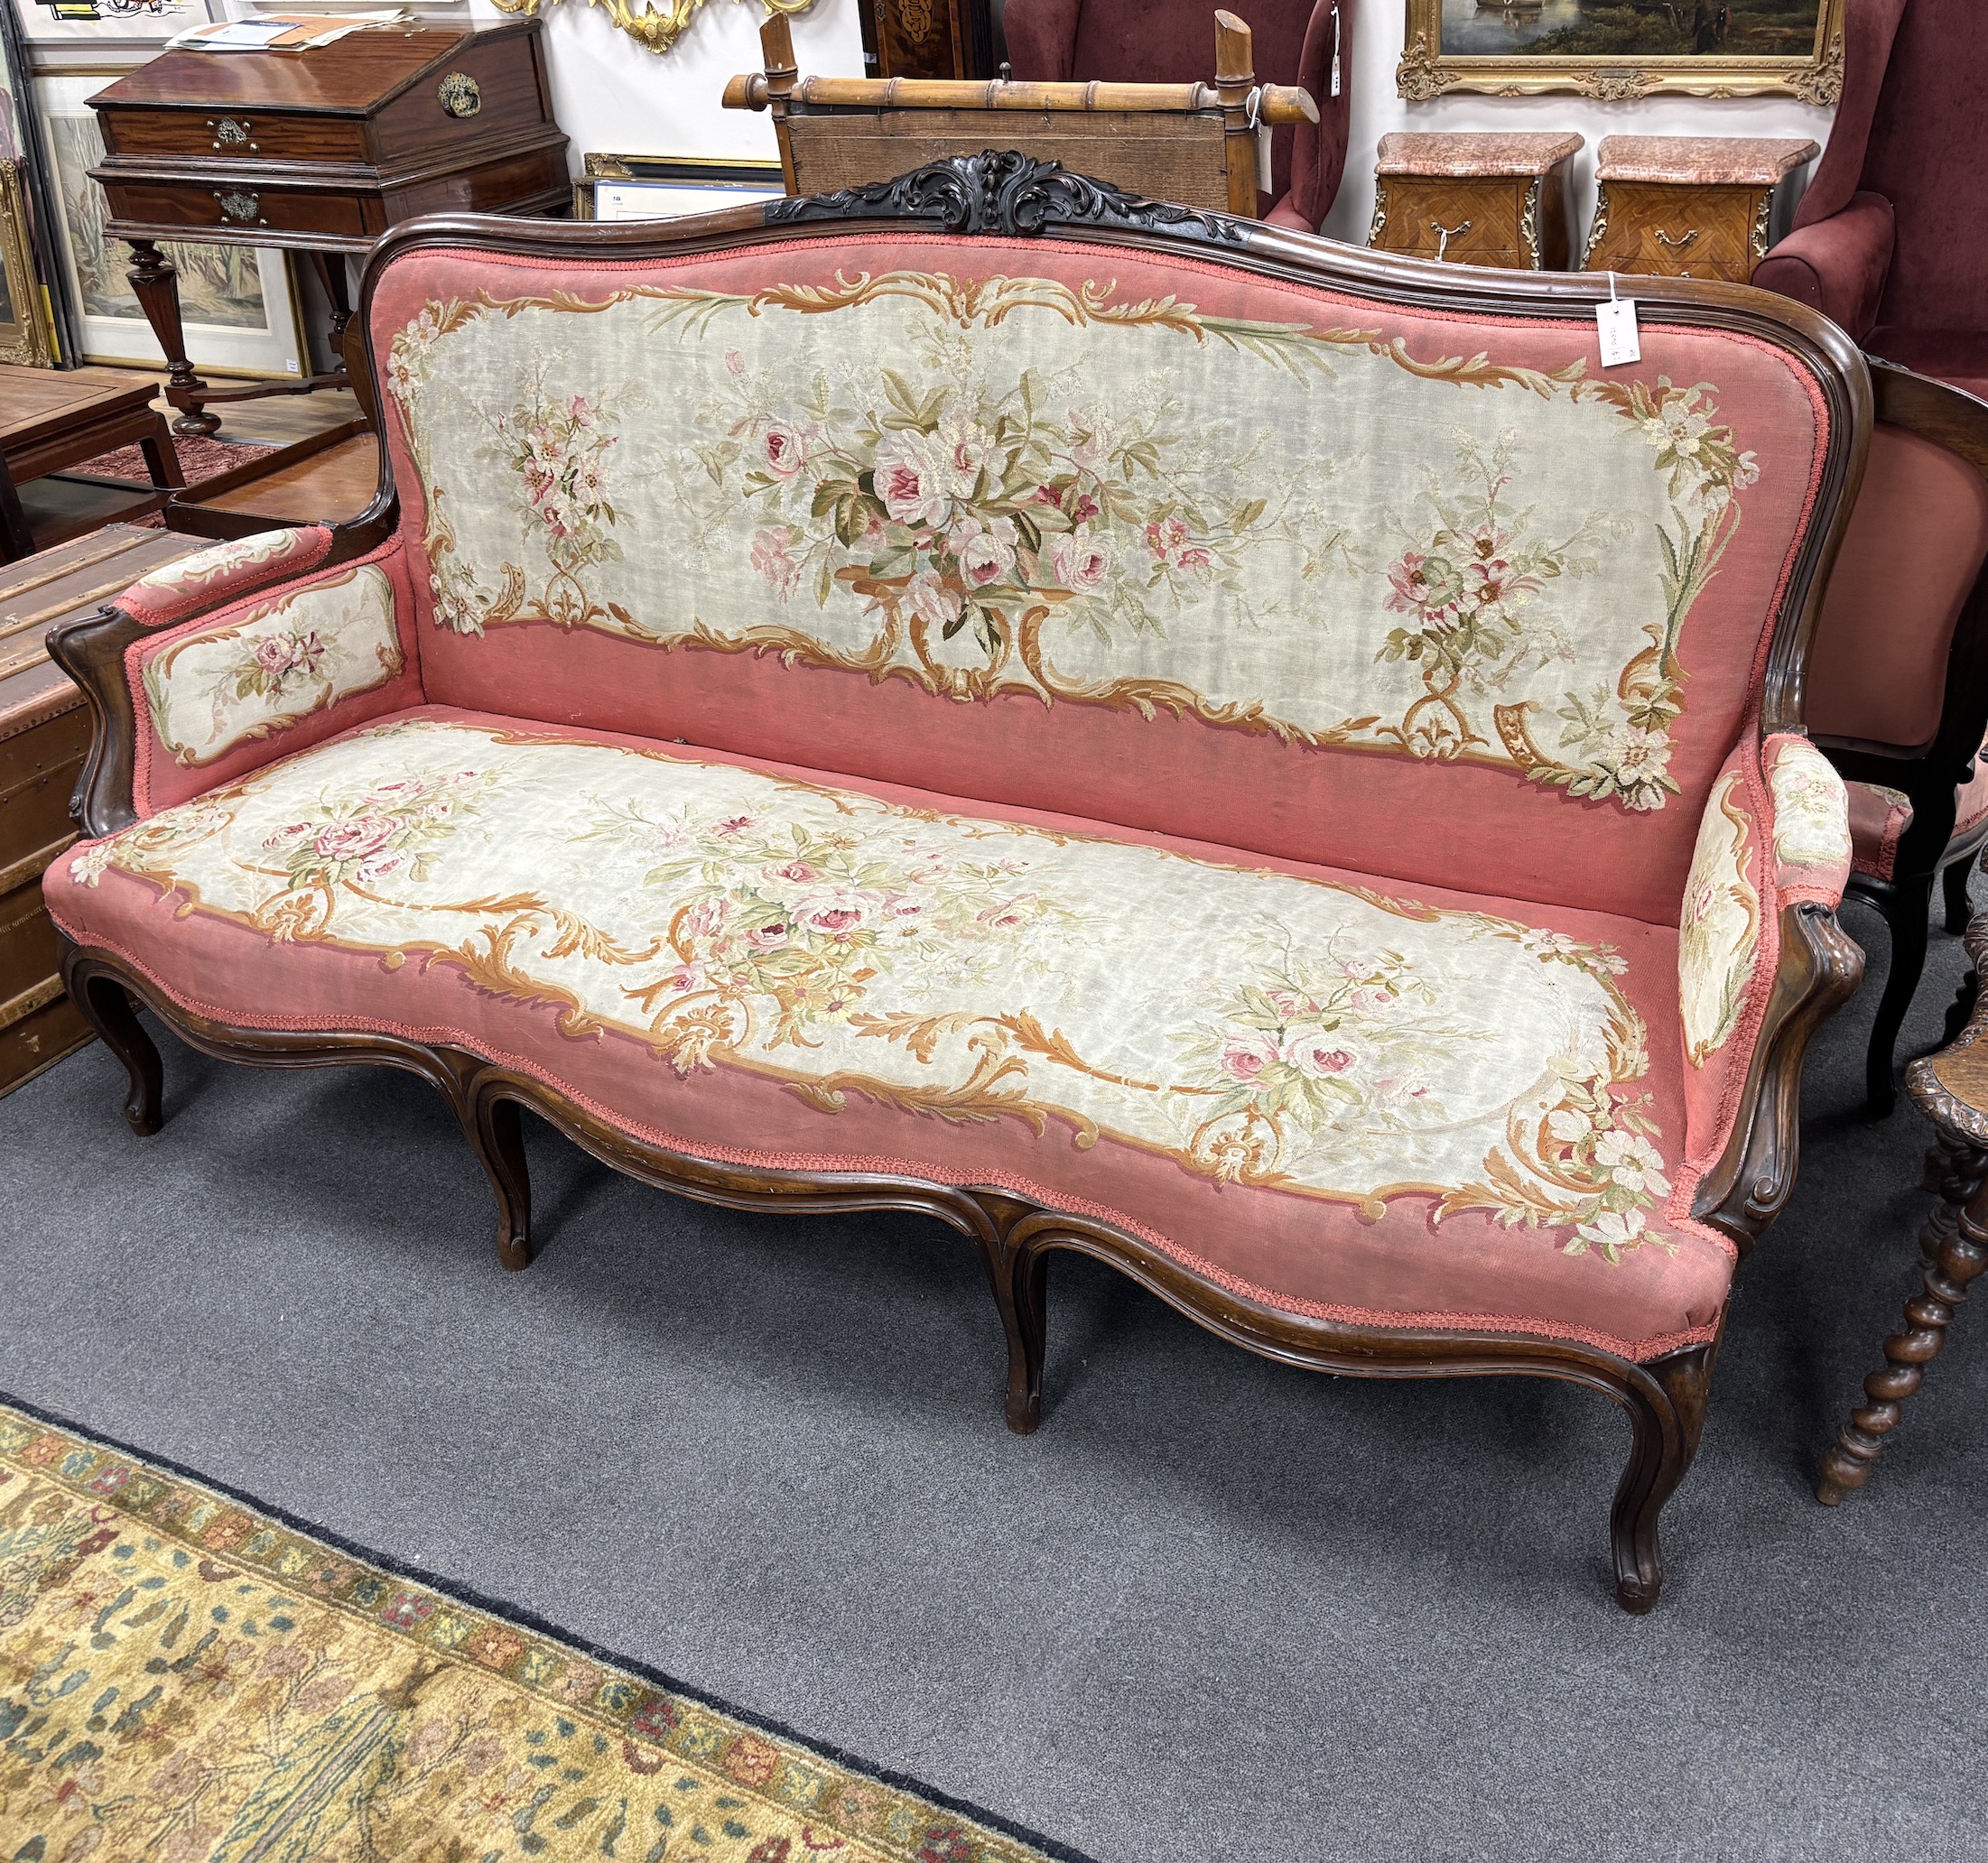 A 19th century French rosewood settee with floral needlepoint upholstery, width 198cm, depth 66cm, height 108cm